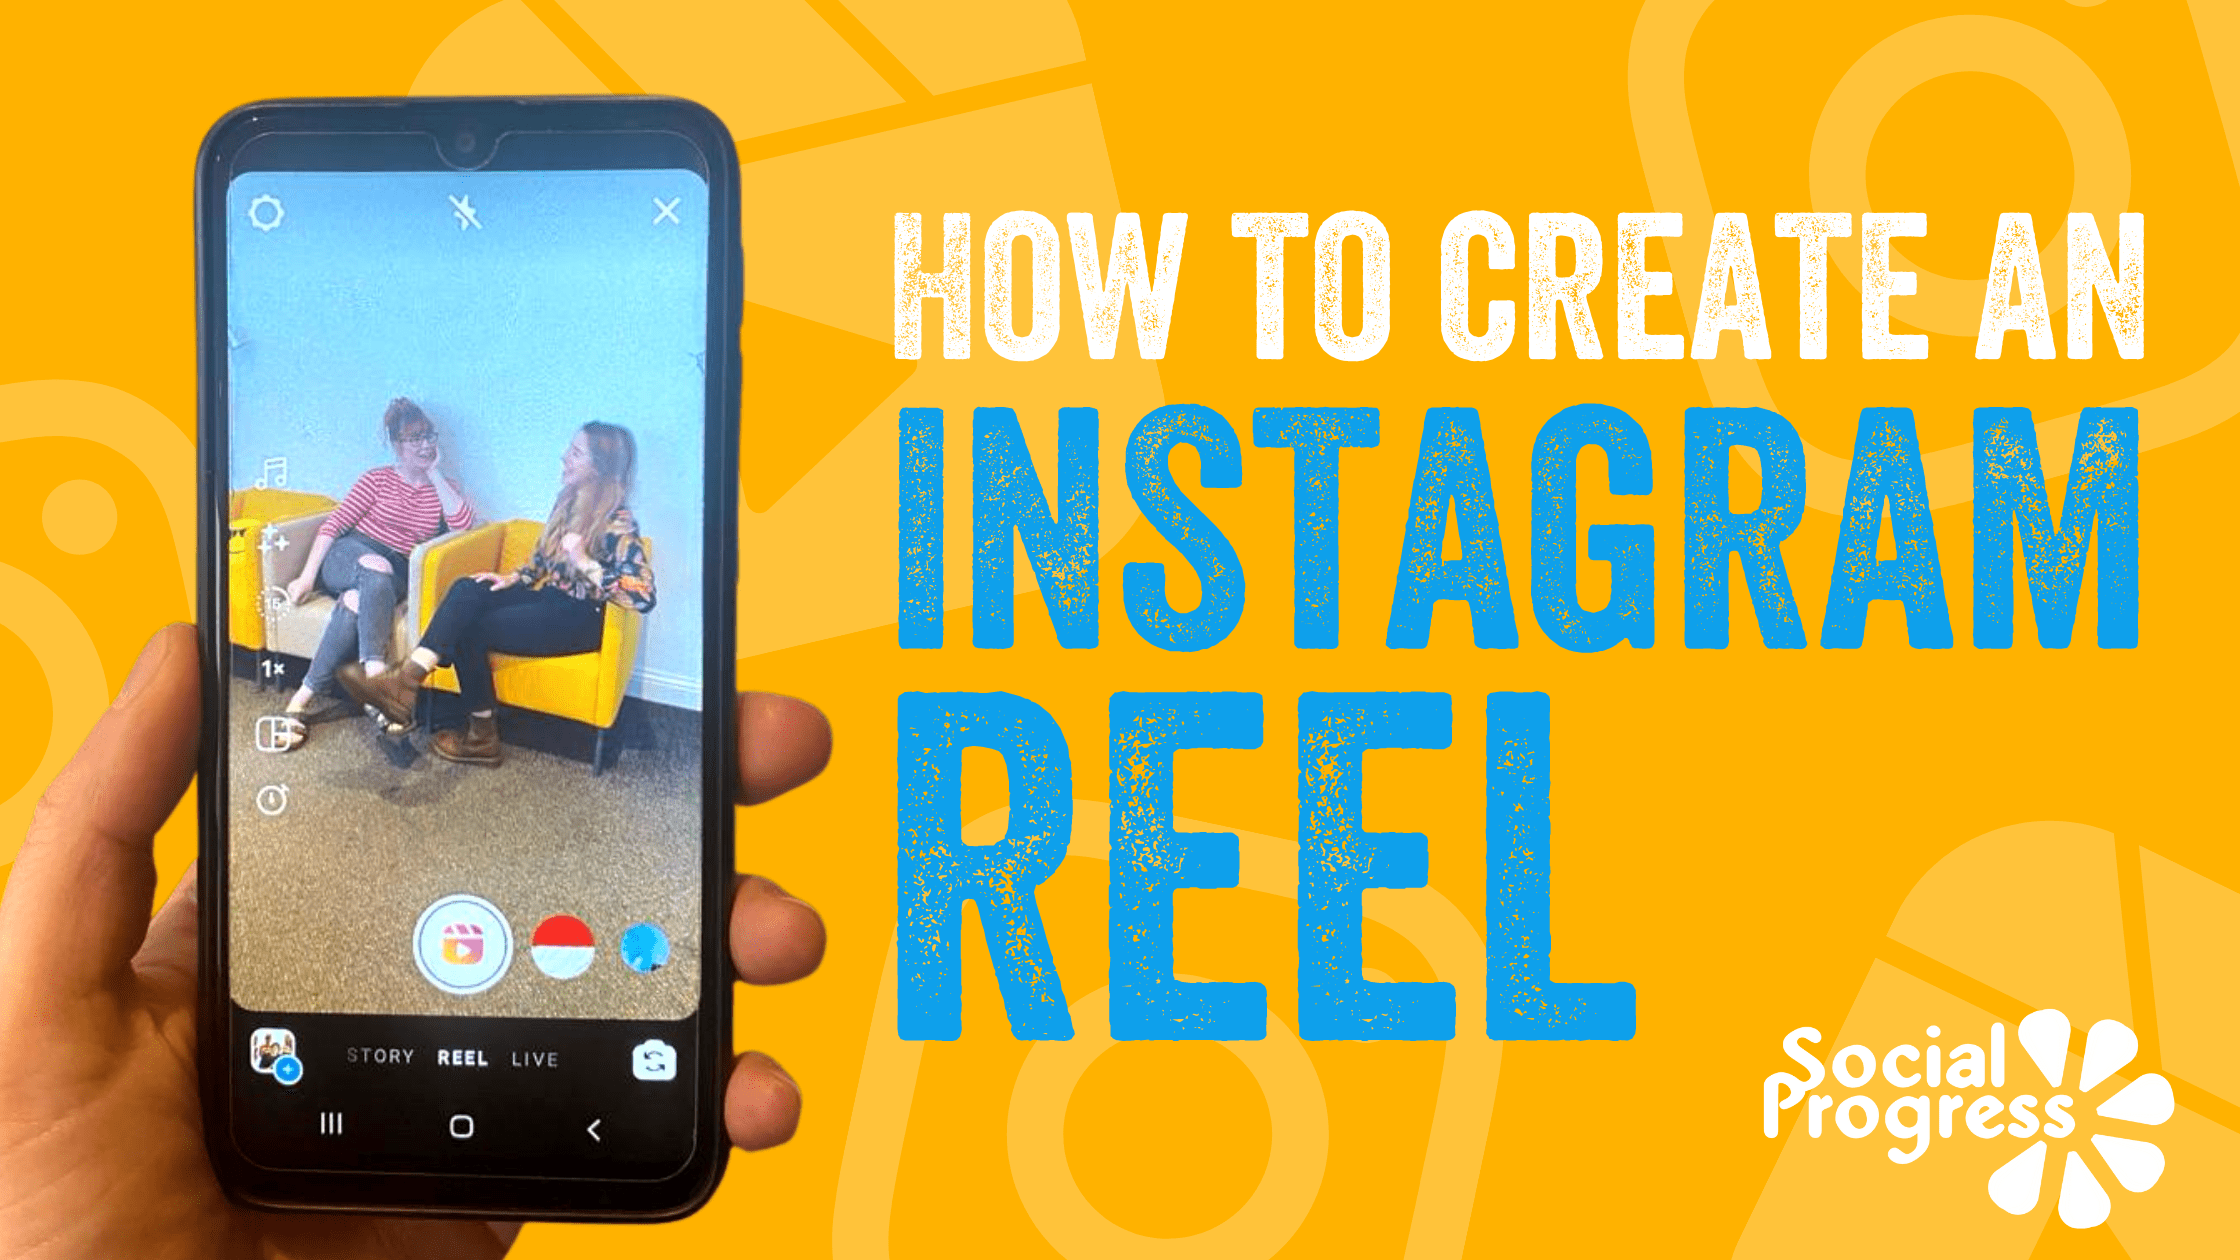 How to create an Instagram Reel by Social Progress, header image with bold headline and photograph of a mobile phone capturing an Instagram Reel